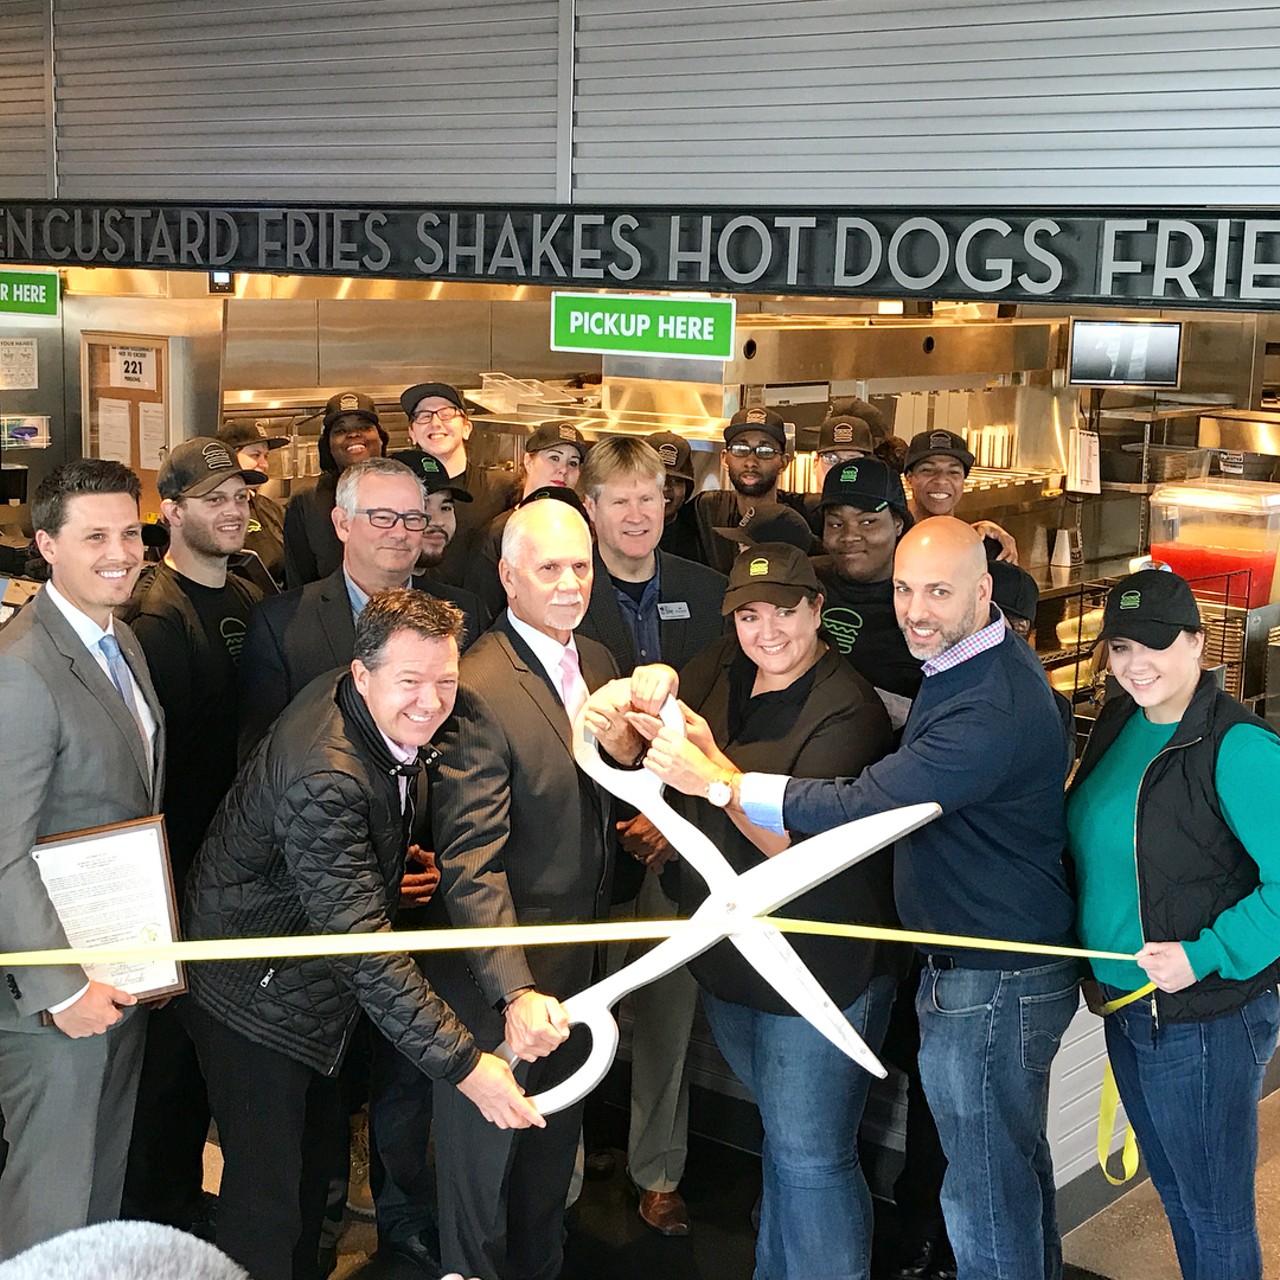 Shake Shack (troy)
850 W Big Beaver Rd., Troy; 248-817-1529
The burger joints keep coming! This is the second New York-based location to come to metro Detroit. The classic burgers, hot dogs, and crinkle cut fries never get old. 
Photo via Instagram user @mattmeyer02